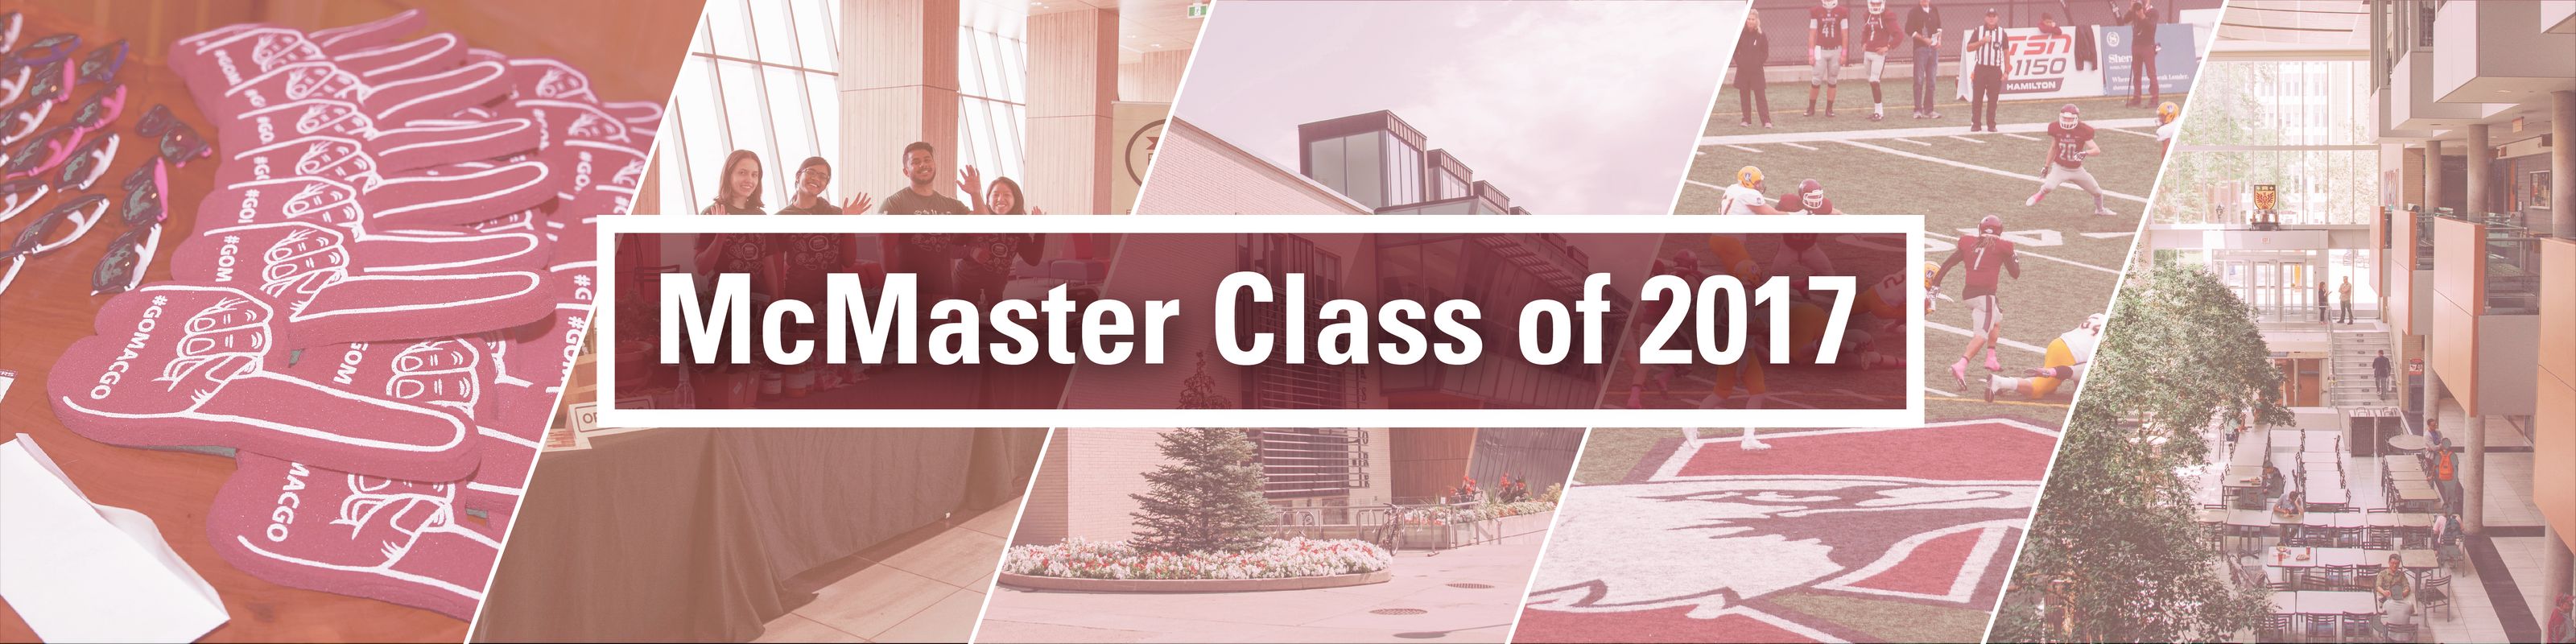 McMaster Class of 2017